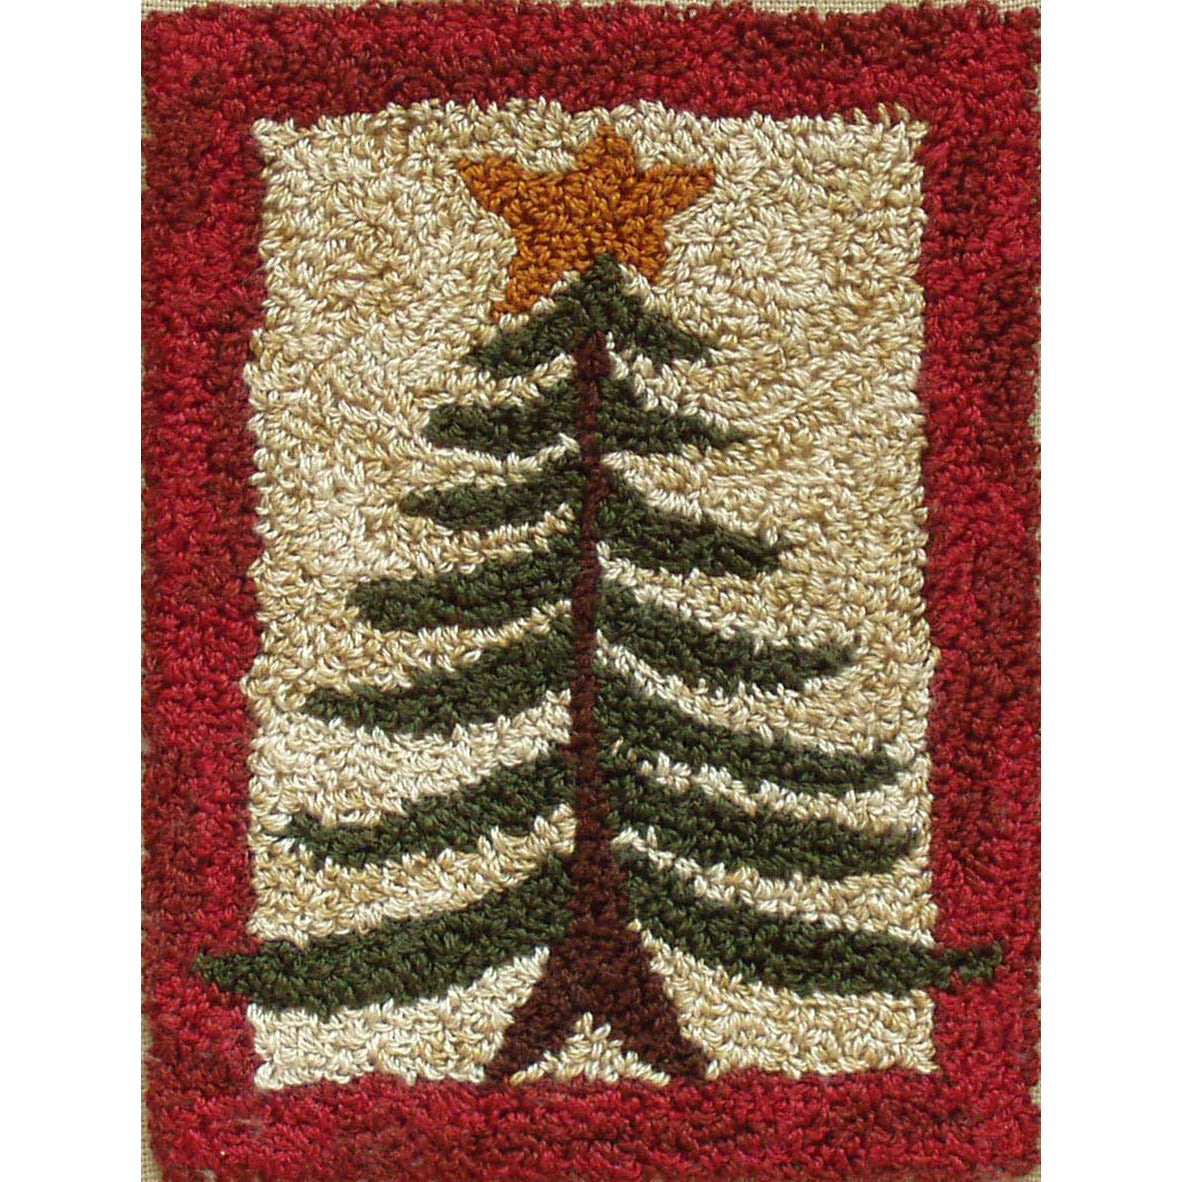 Pine Tree Punch Needle Embroidery Kit